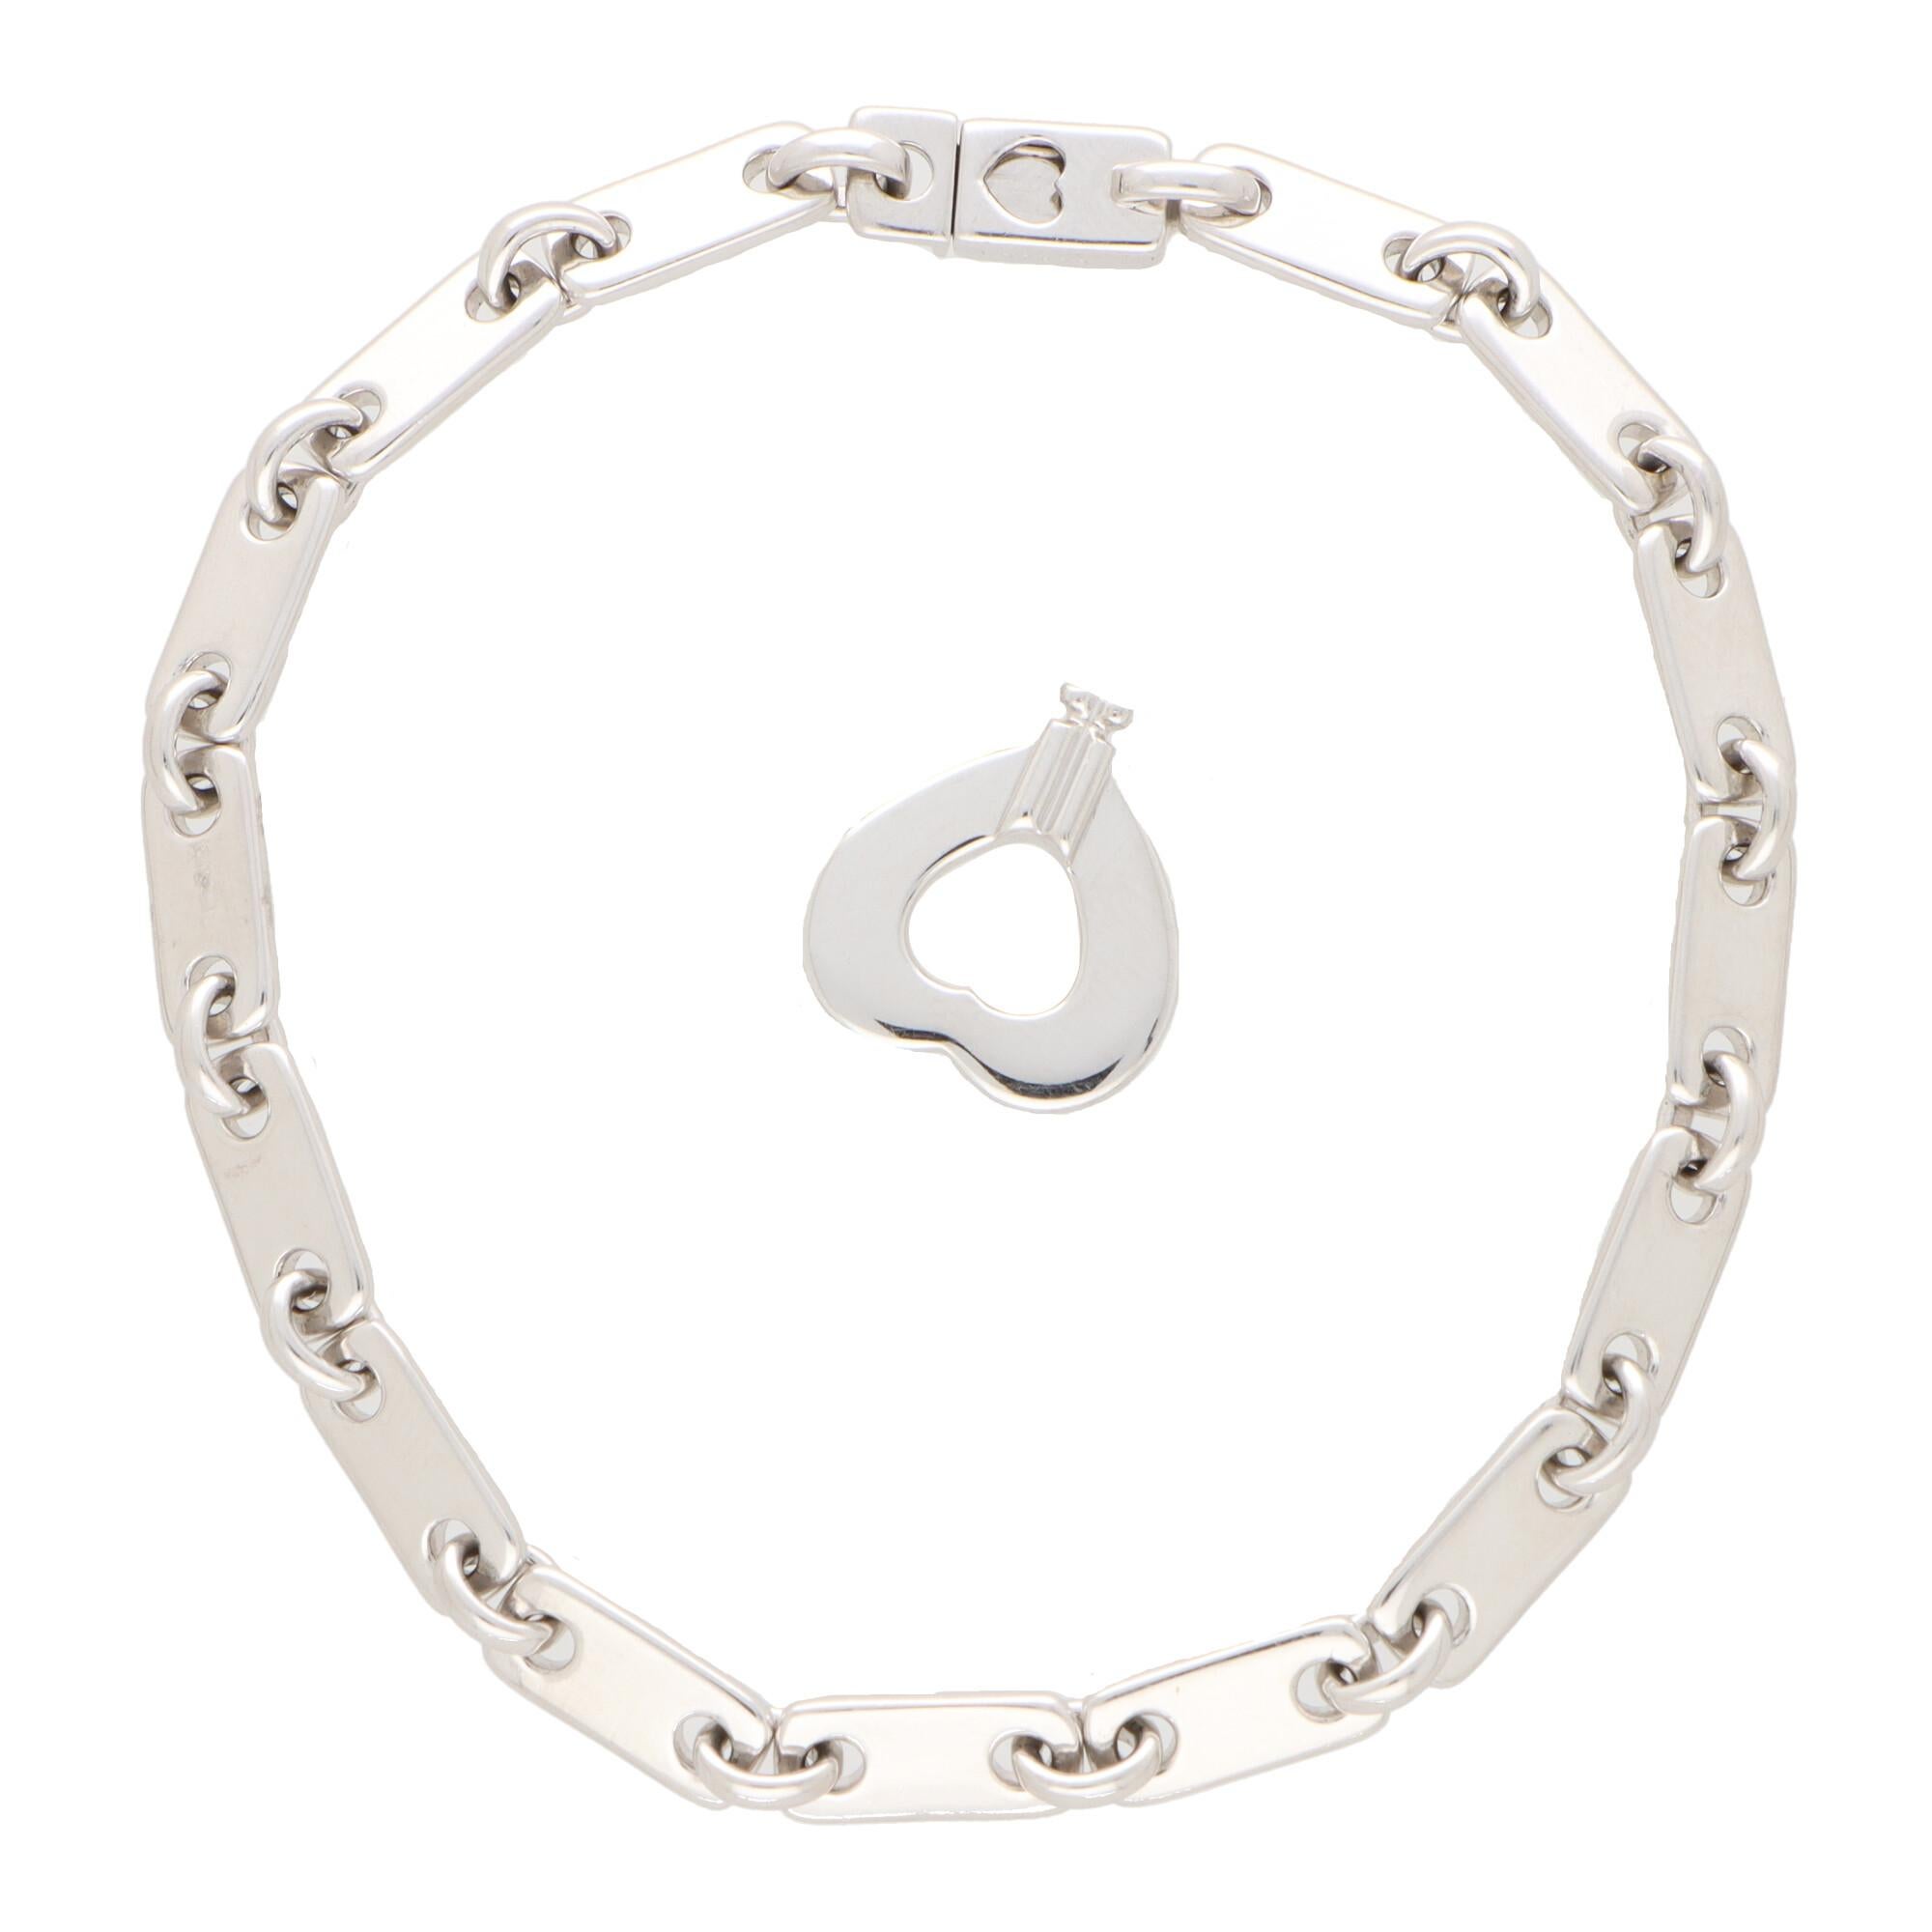 Vintage Cartier Fidelity Lock and Key Chain Link Bracelet in 18k White Gold For Sale